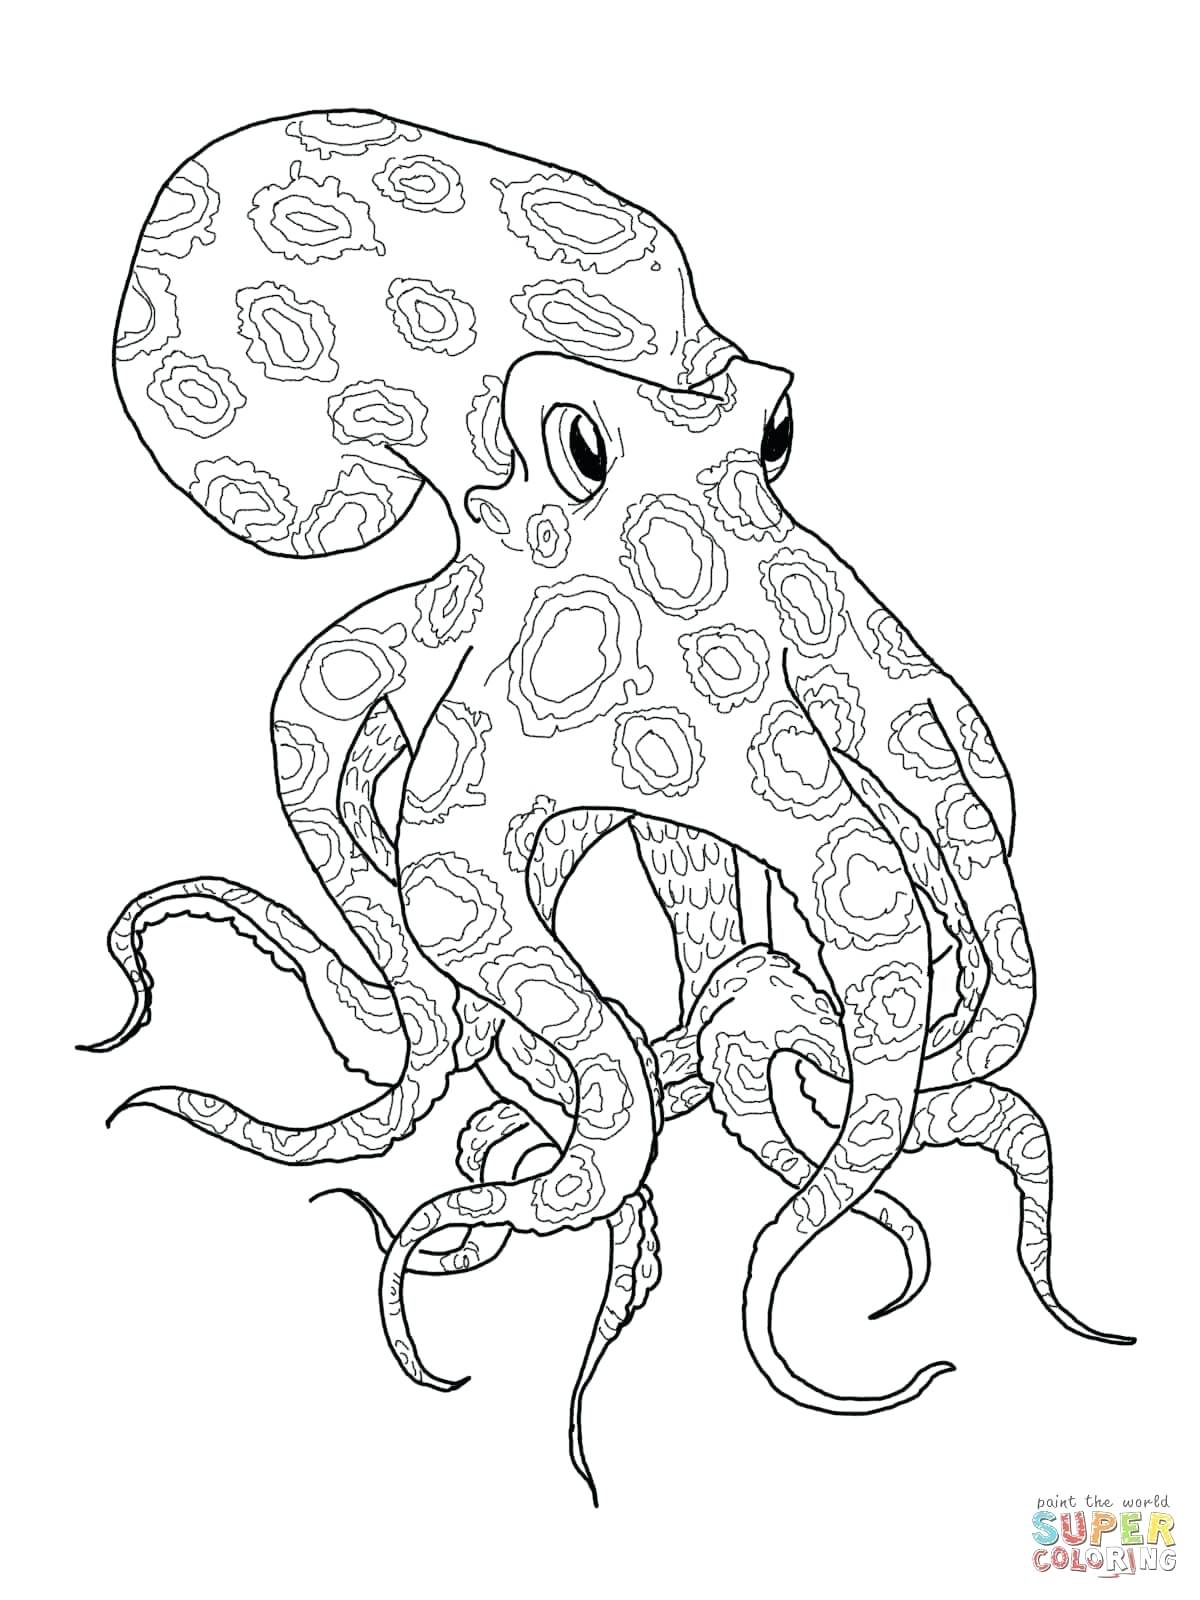 Squid Coloring Pages Printable Vampire Squid Coloring Page Dracosheetco